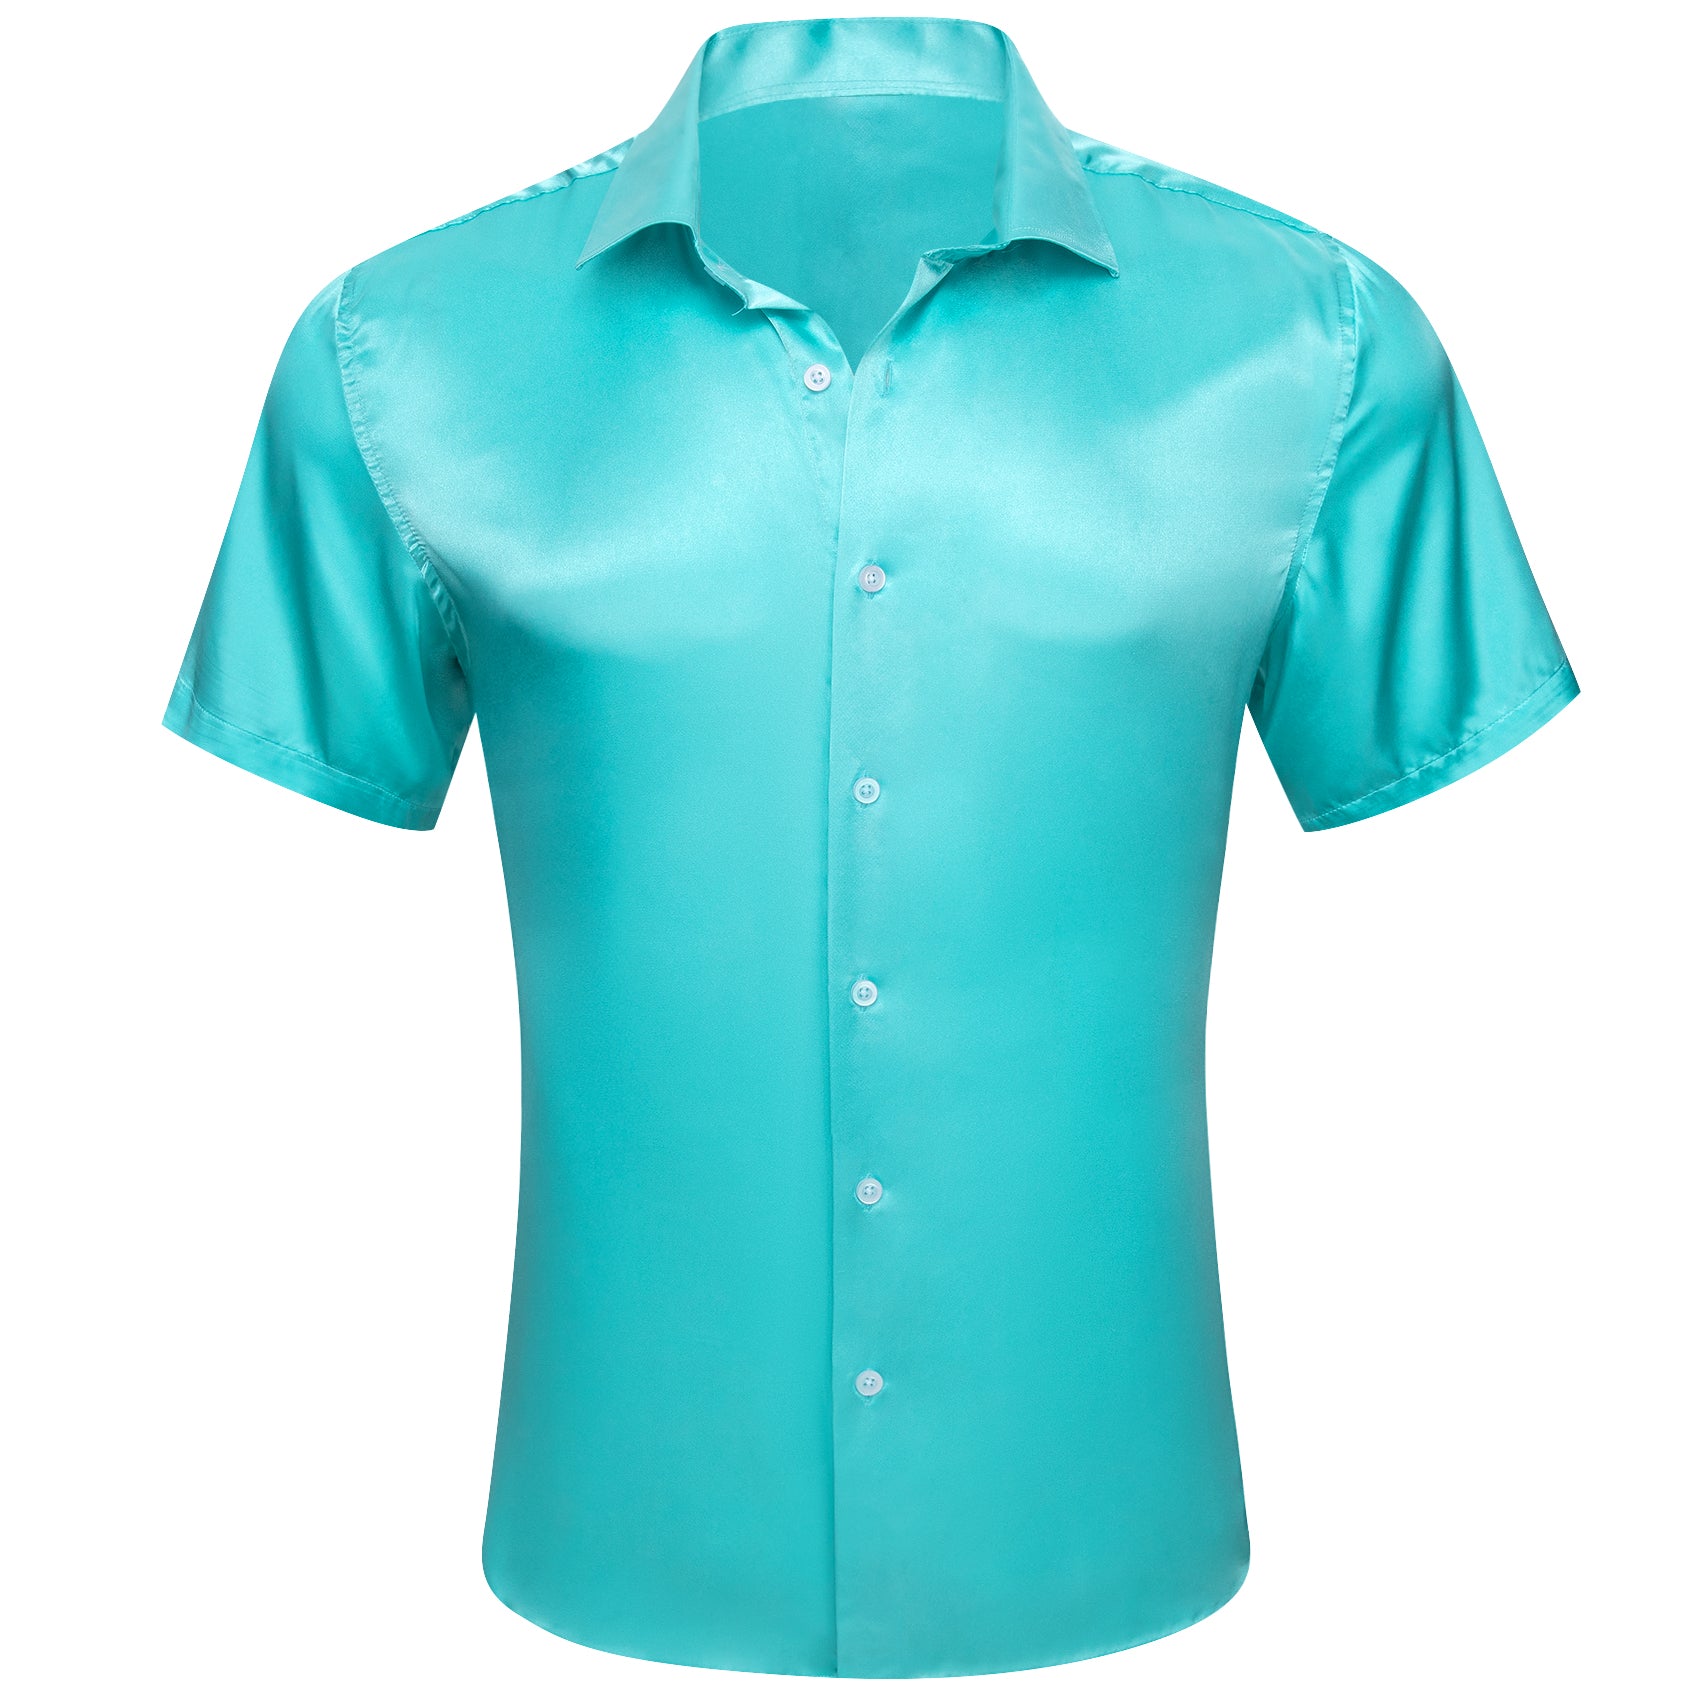 Barry.wang Pale Blue Solid Short Sleeves Shirt